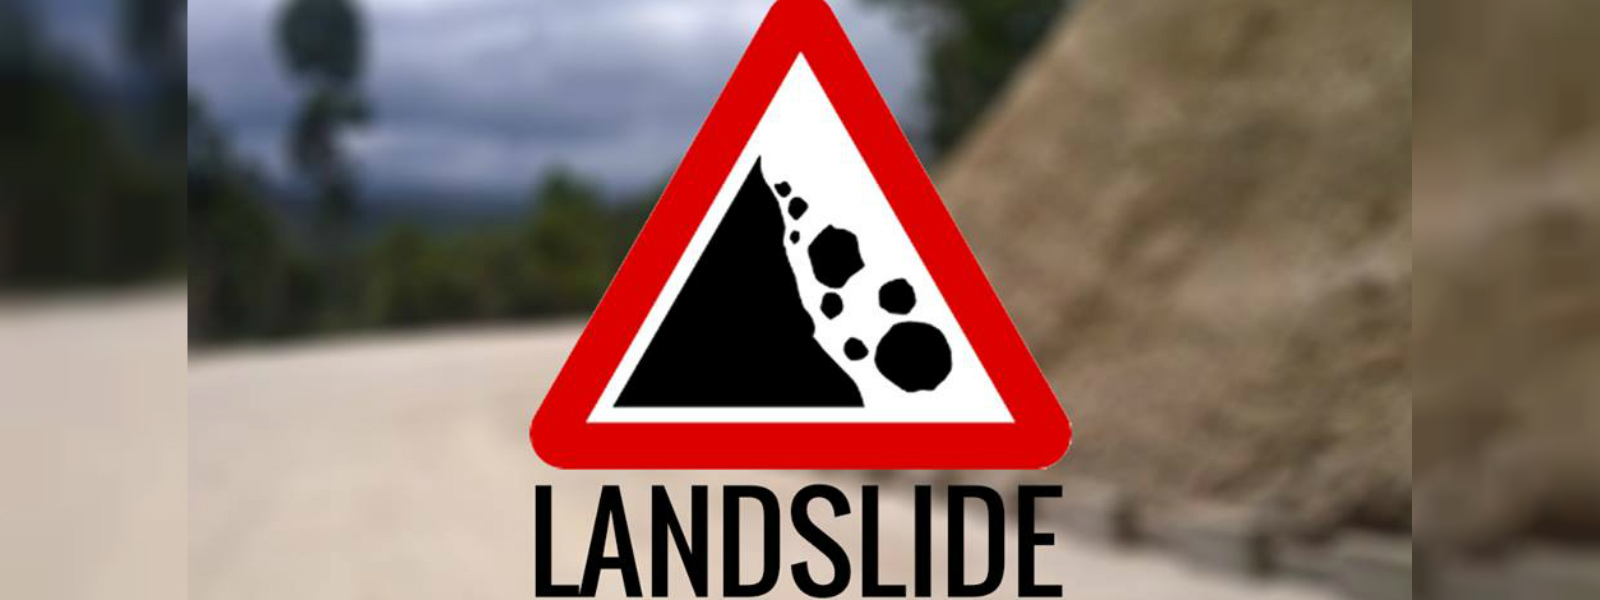 Landslide warning for Ella and two other areas